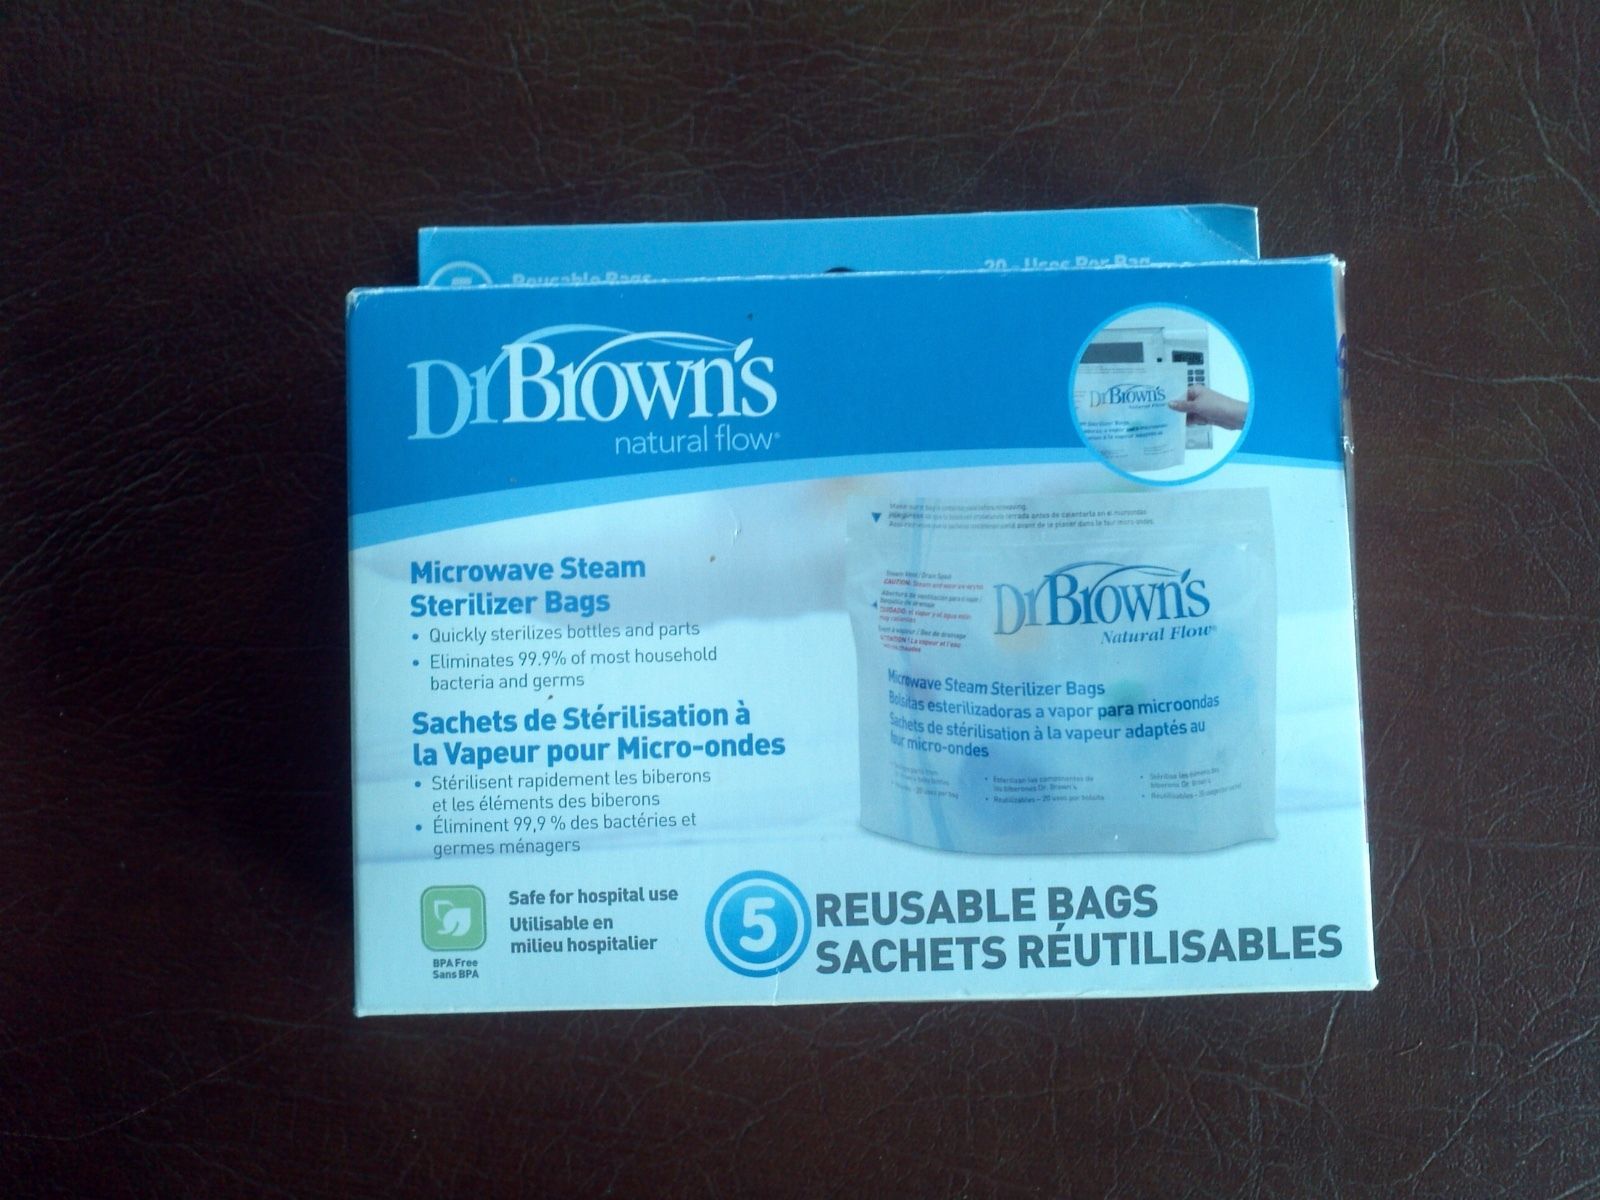 DR BROWN natural flow microwave steam sterilizer bags   ( 4 bags ) - $6.93